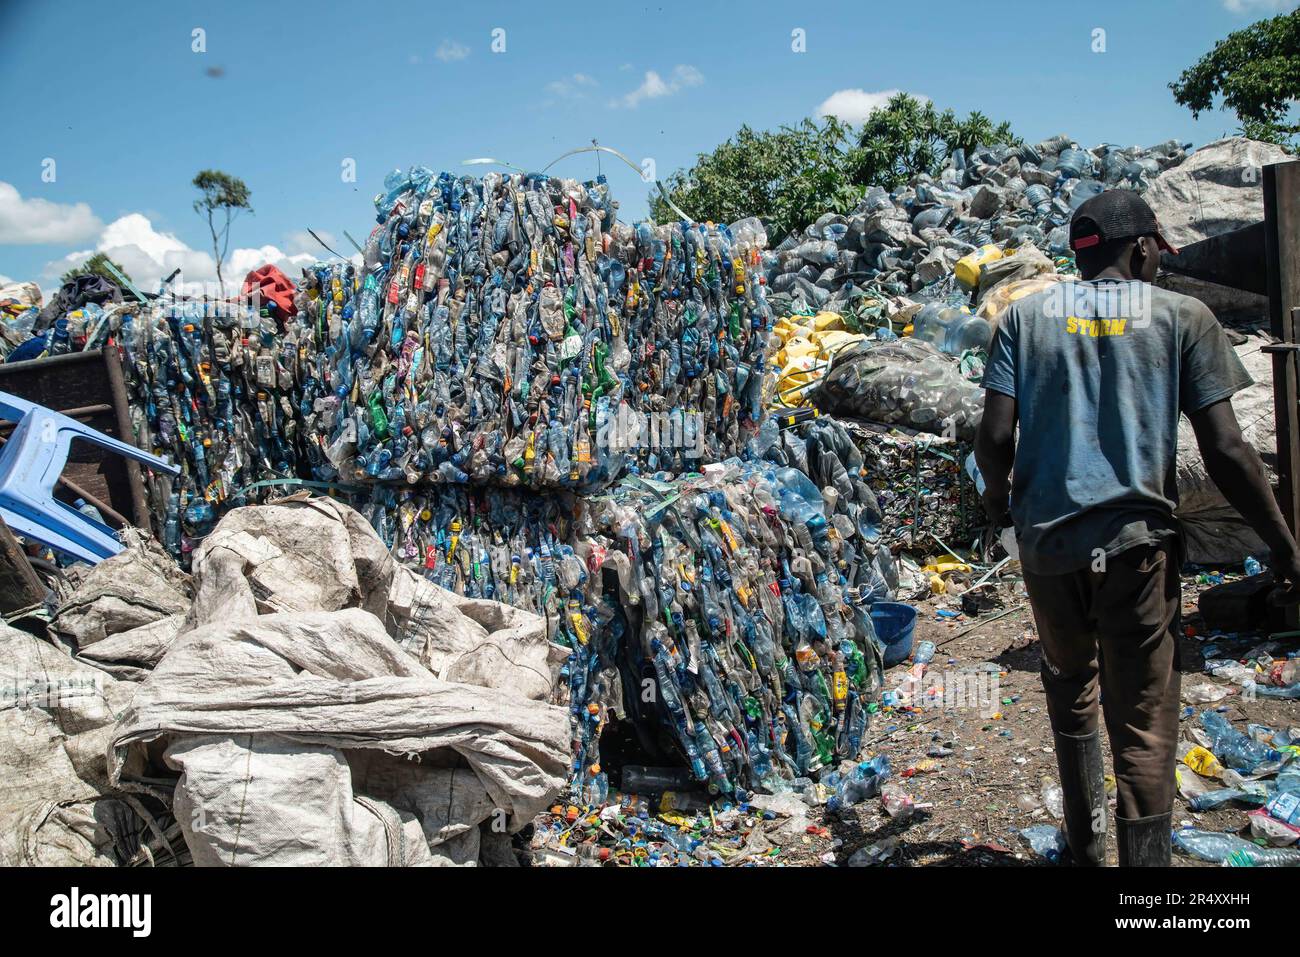 May 30, 2023, Nakuru, Kenya: A worker is seen at a plastic recycling plant in Nakuru. Negotiators have gathered in Paris, France for the second round of deliberations to develop a global treaty aimed at tackling the escalating issue of plastic pollution. According to a recent report by the United Nations Environment Programme (UNEP), countries have the potential to reduce plastic pollution by 80% by 2040 by eliminating unnecessary plastics, implementing recycling and reuse strategies, introducing deposit return schemes, and substituting plastic with sustainable alternative materials. (Credit I Stock Photo